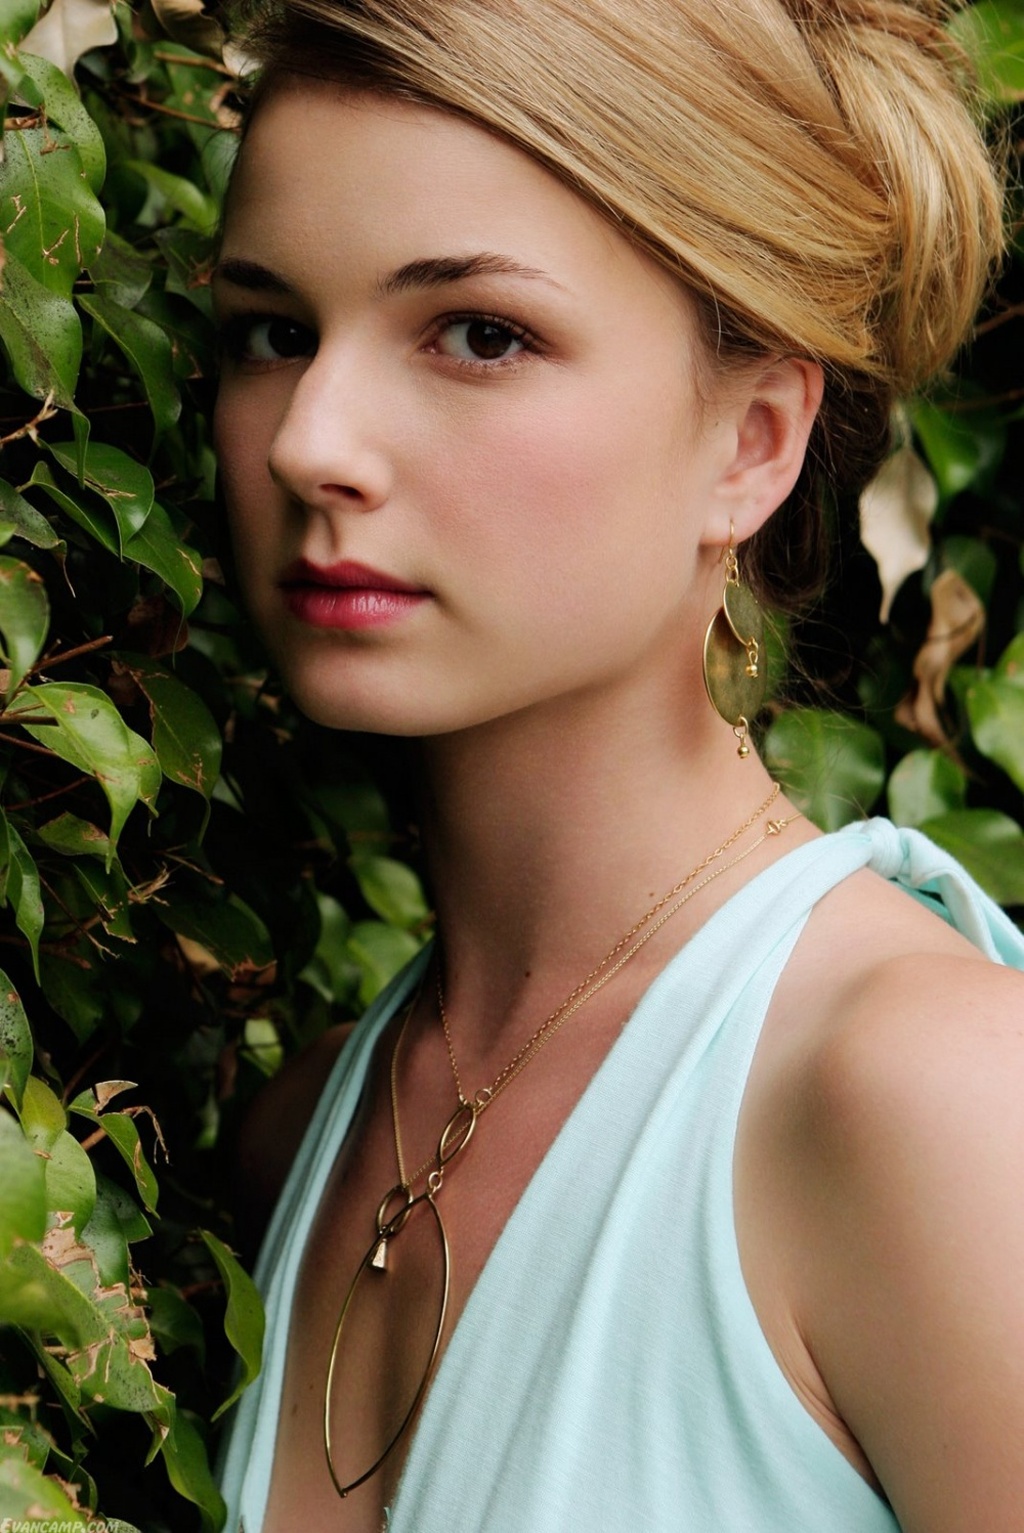 People 1024x1533 Emily Vancamp women actress women outdoors nature plants face portrait display closeup necklace outdoors leaves